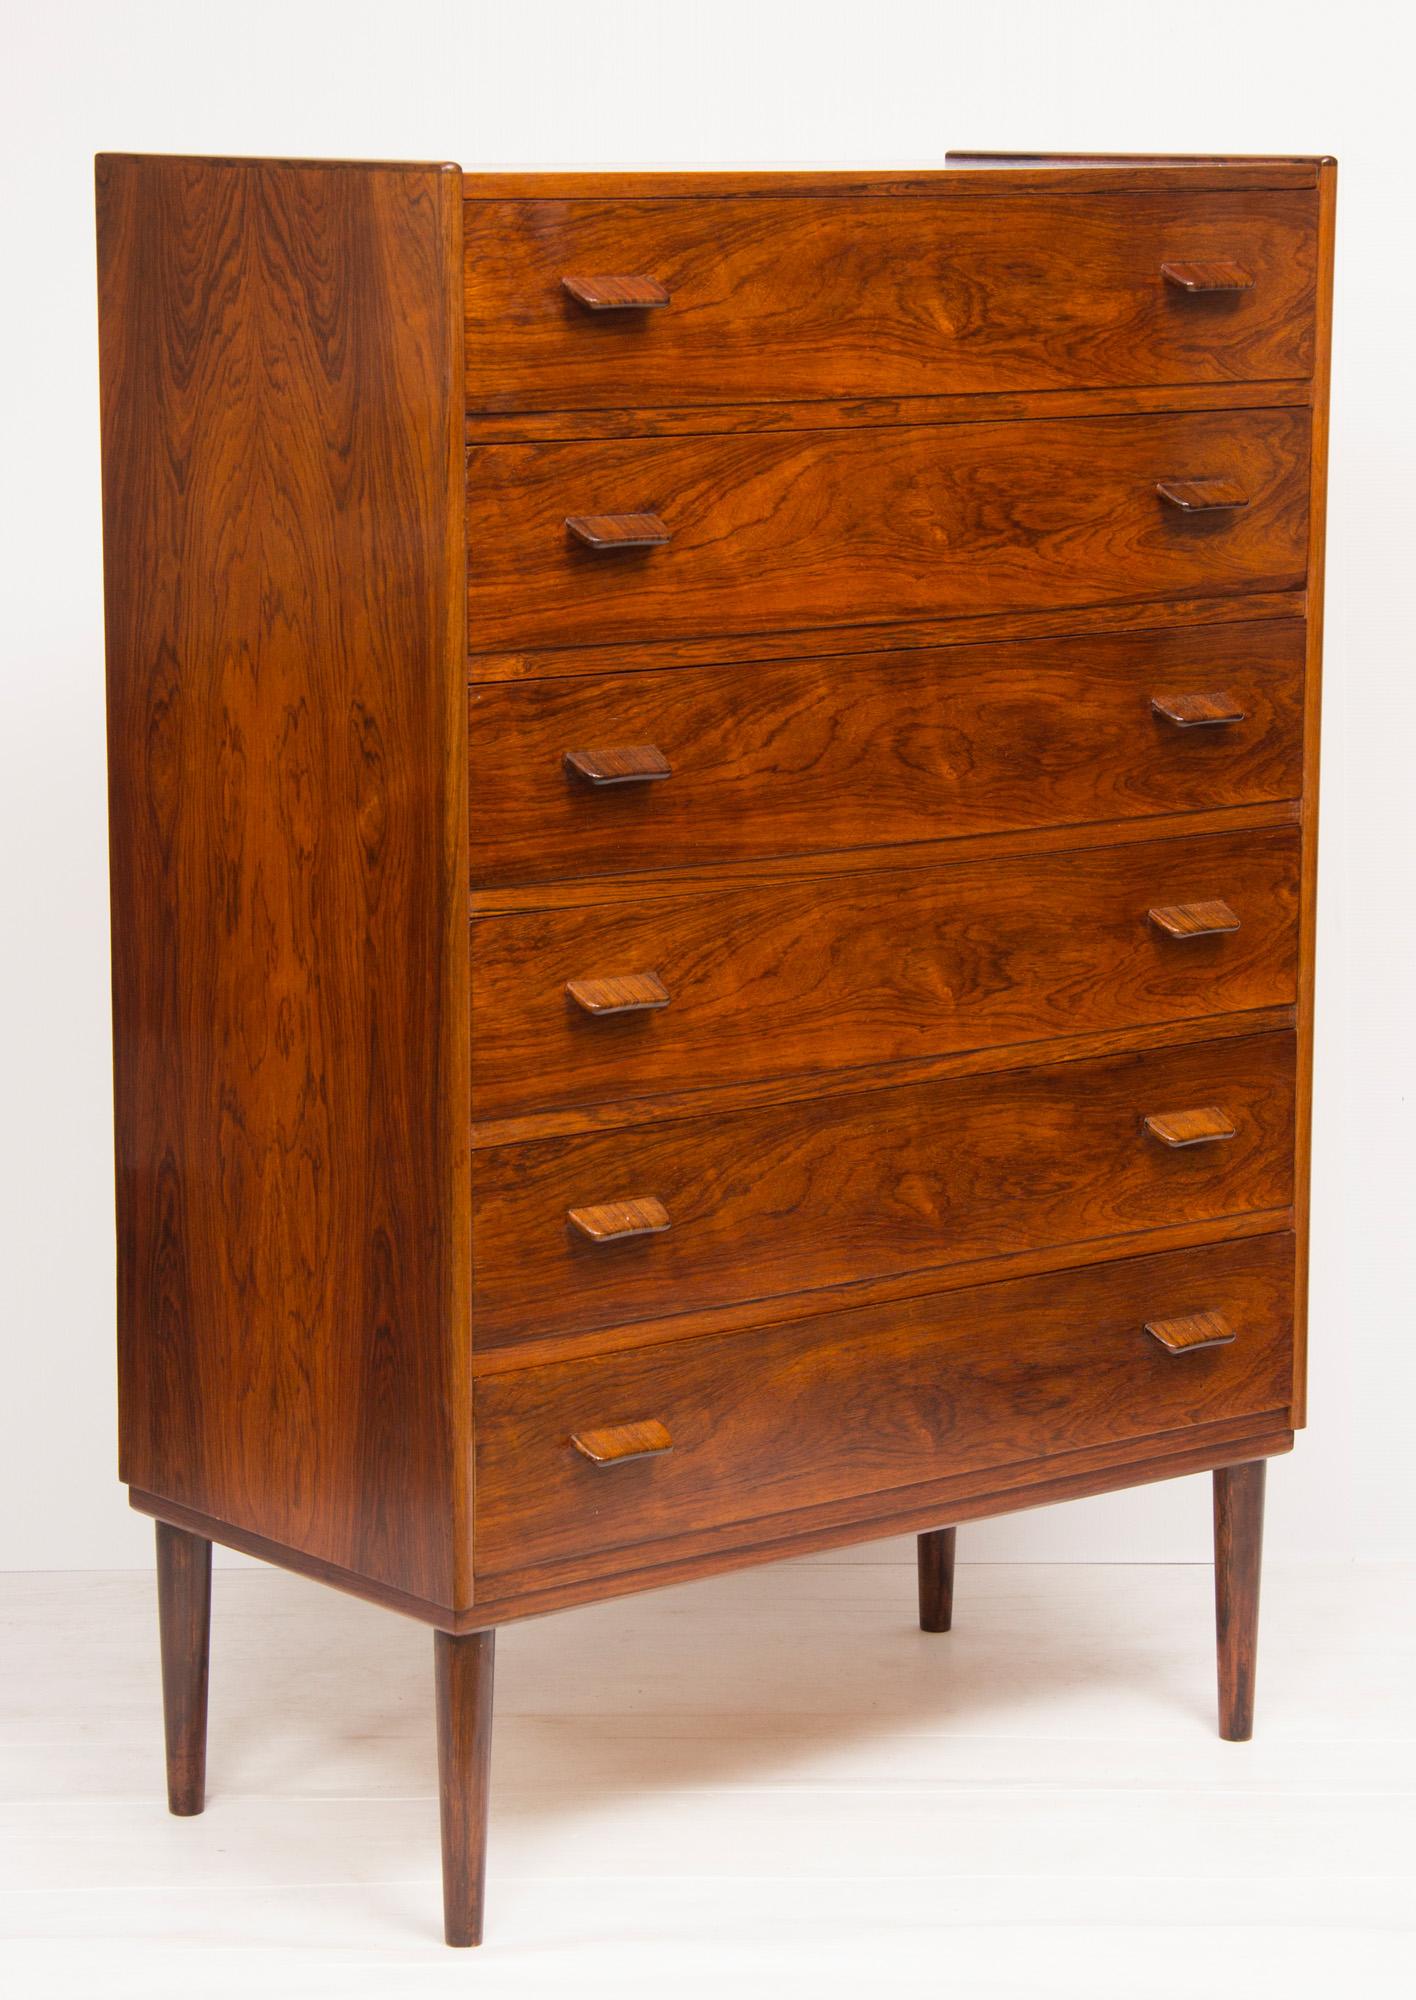 1960s rosewood Danish chest of drawers by Poul Volther.